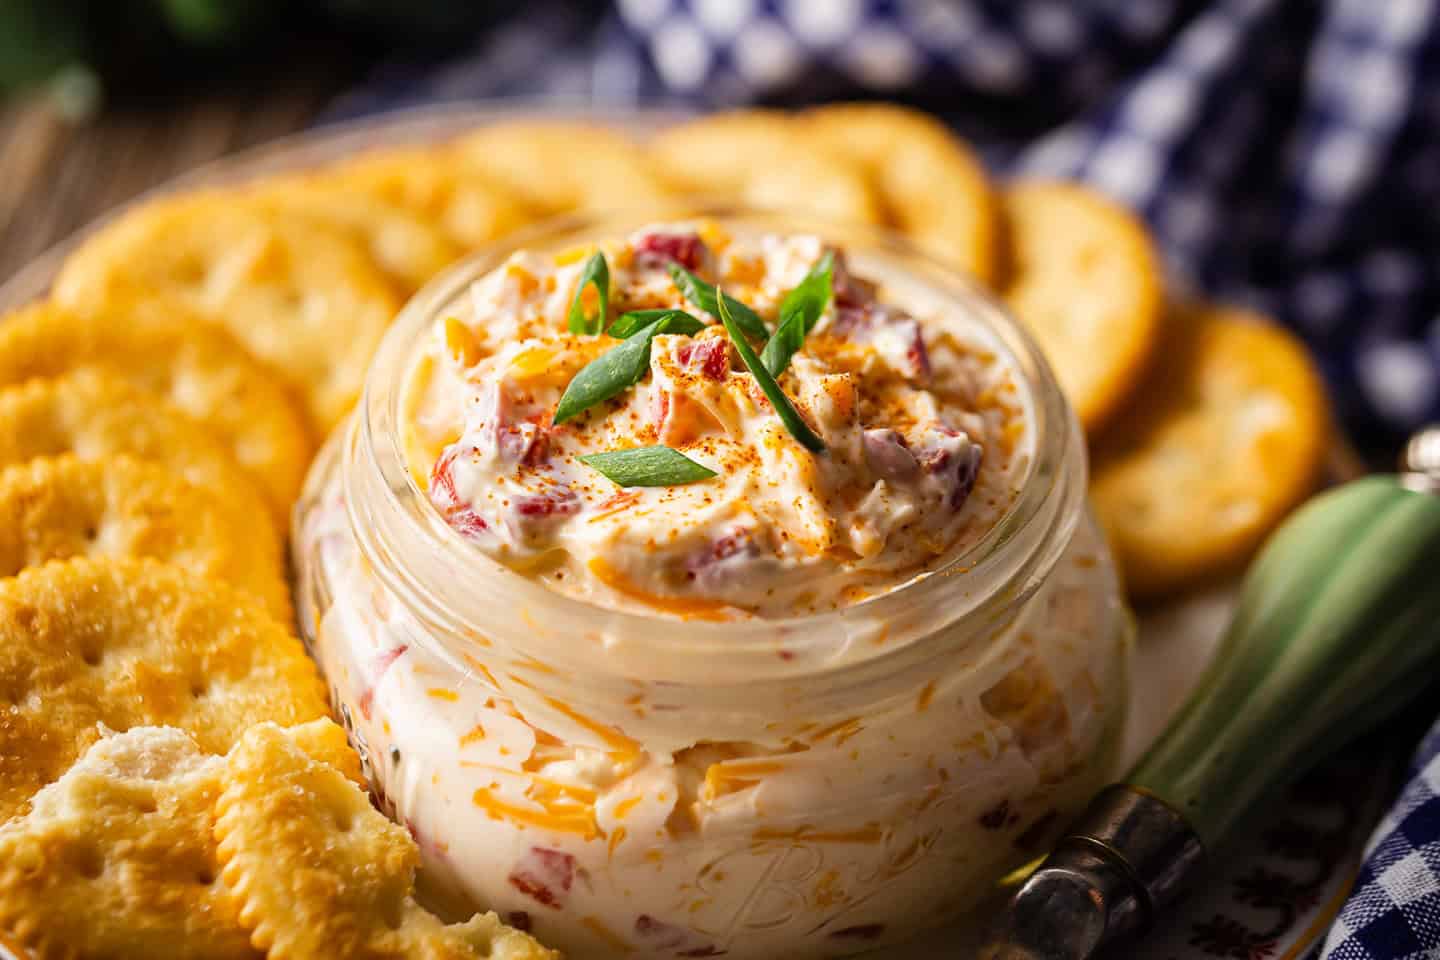 How to make pimento cheese in 2 easy steps, served with crackers or as a topping on sandwiches or a hot dip.